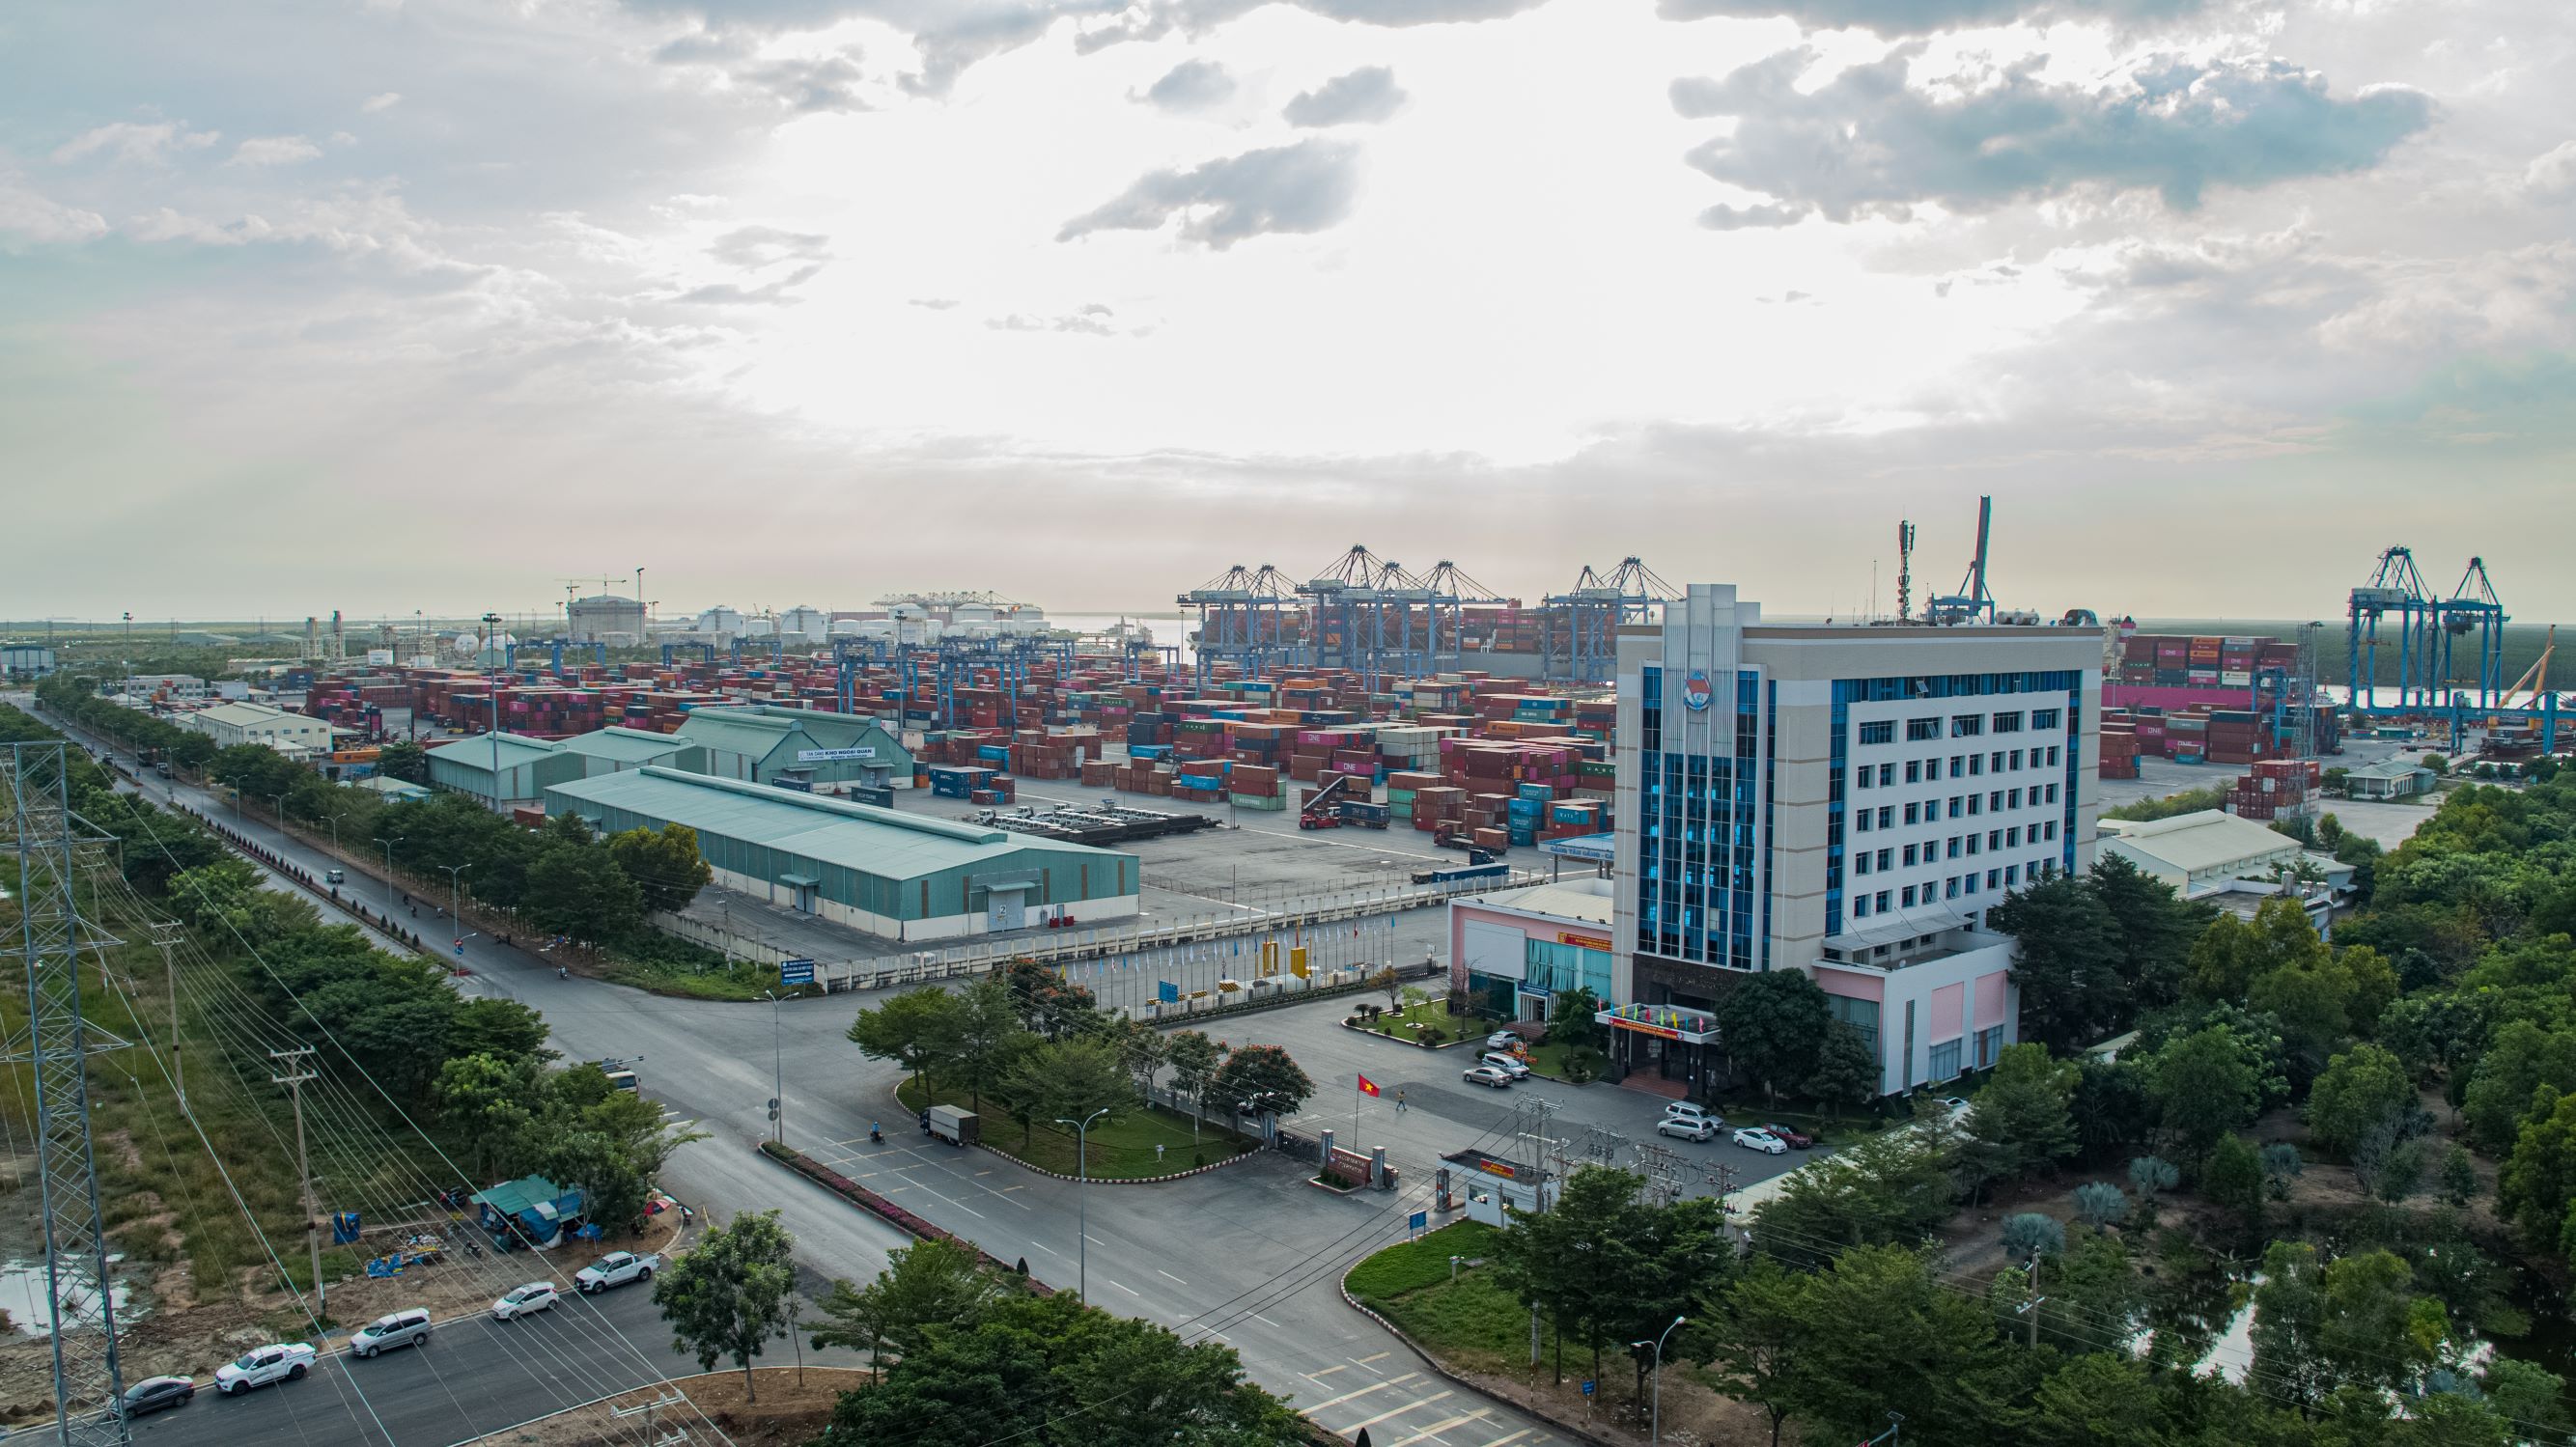 TAN CANG – CAI MEP INTERNATIONAL TERMINAL (TCIT) AWARDED GREEN PORT 2020 BY THE APEC PORTS SERVICE NETWORK (APSN) COUNCIL